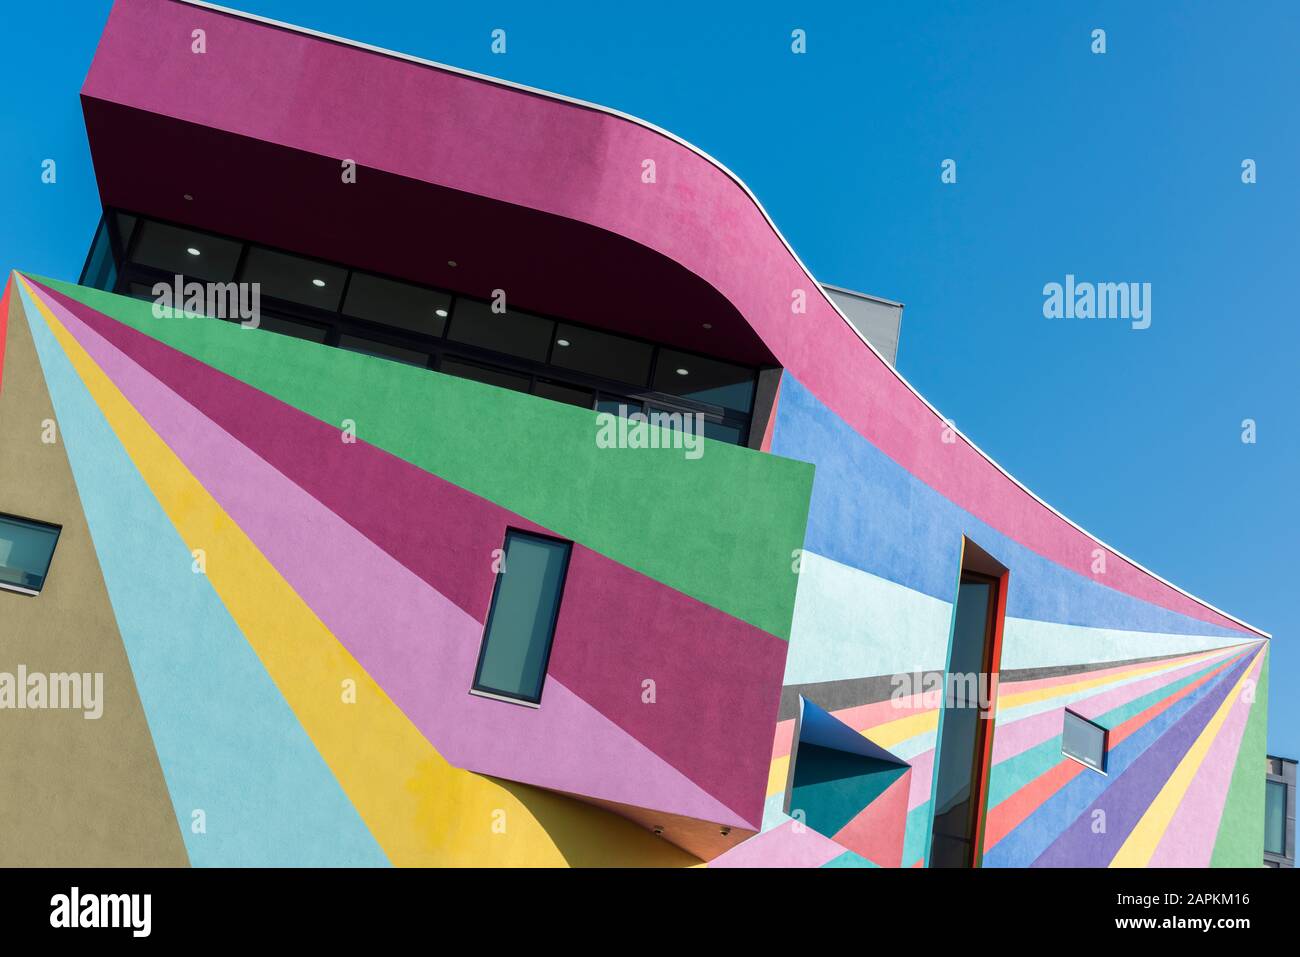 Exterior view of the Towner Art Gallery in Eastbourne, East Sussex, England, UK. Showing the mural created by Lothar Götz in 2019. Stock Photo